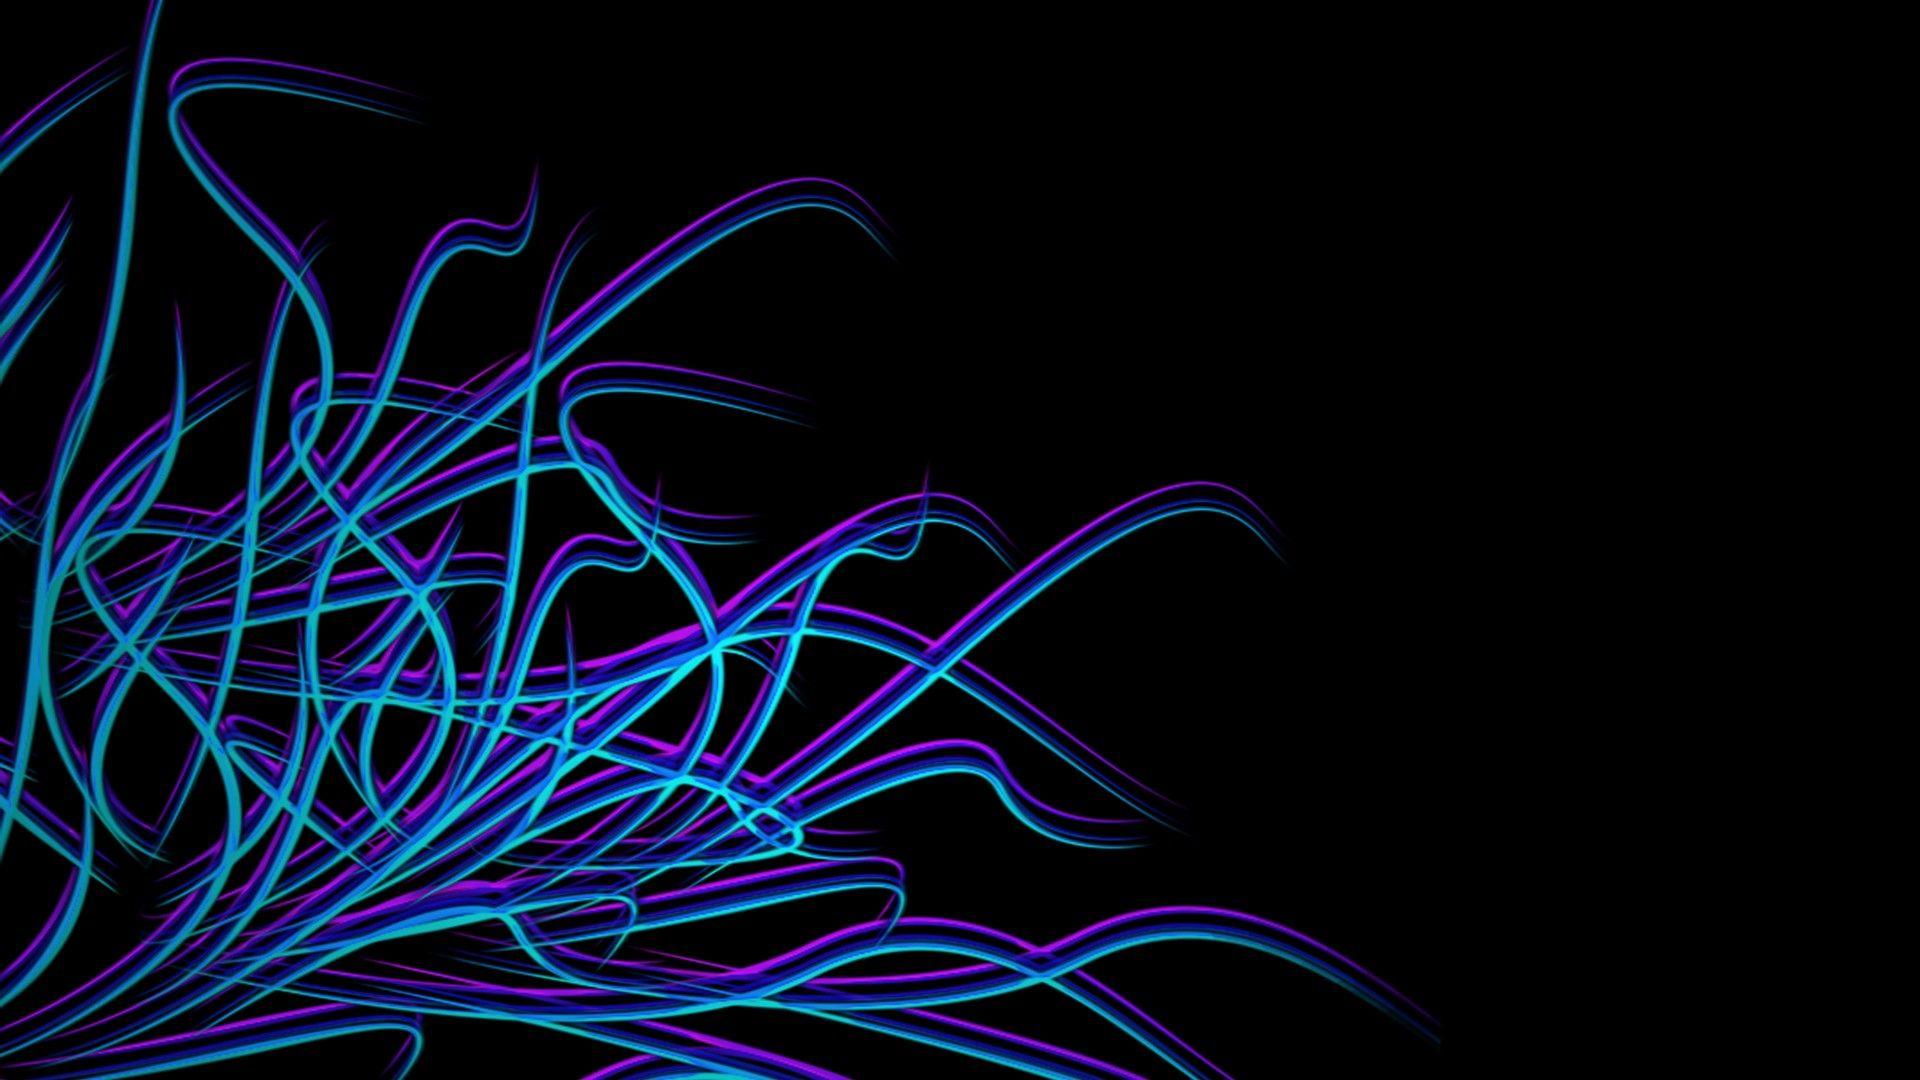 Blue Cool Hd Neon Wallpapers - Top Free Blue Cool Hd Neon Backgrounds